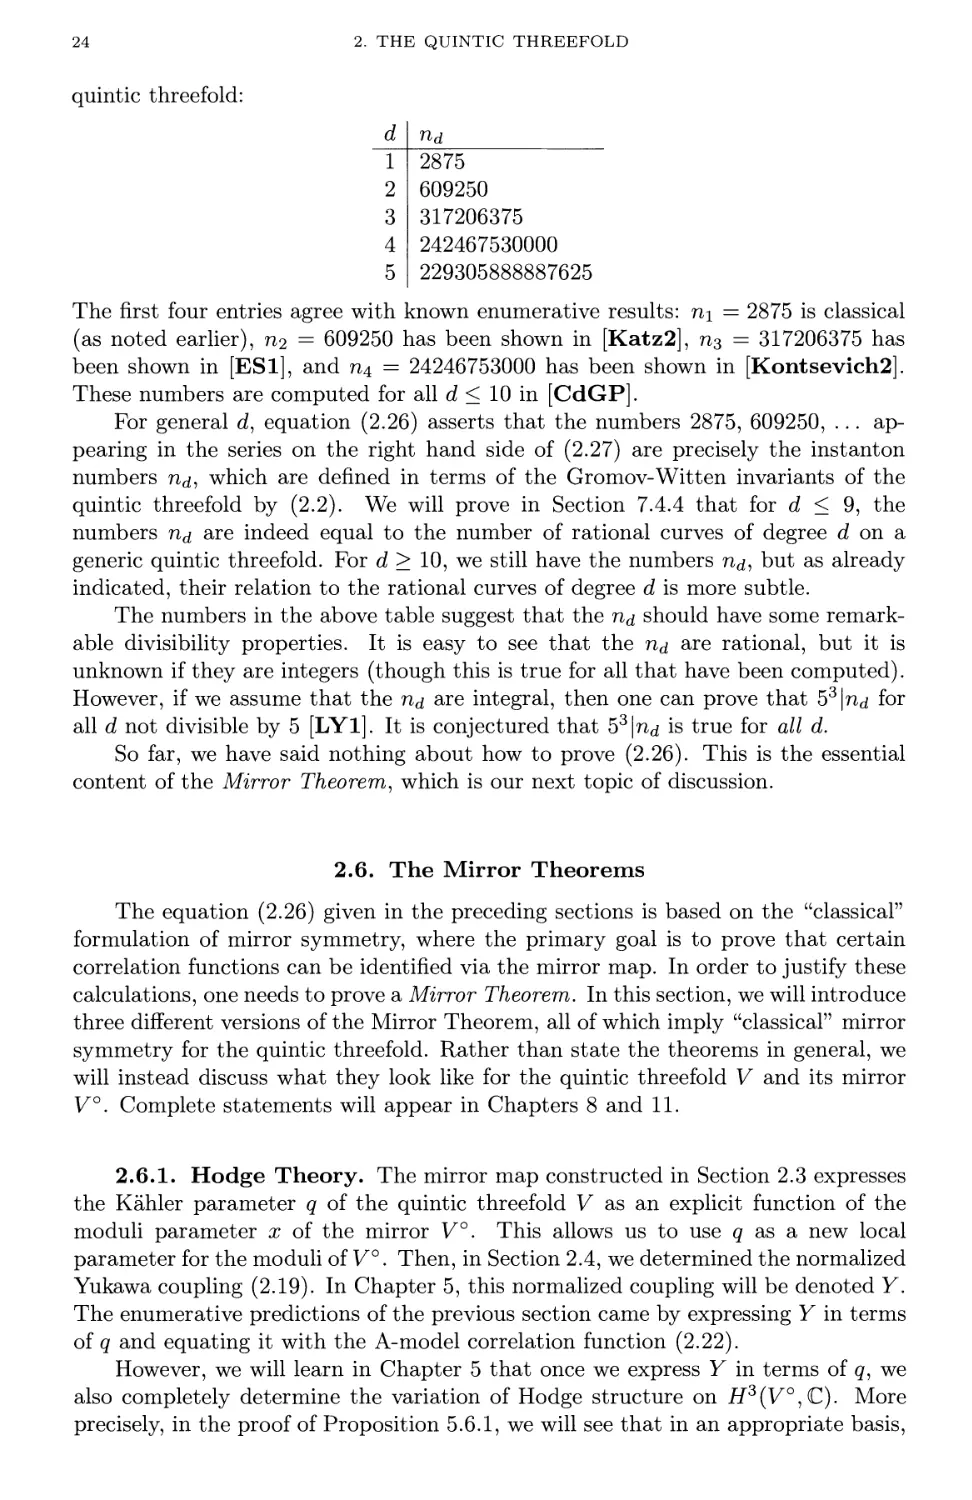 2.6. The Mirror Theorems